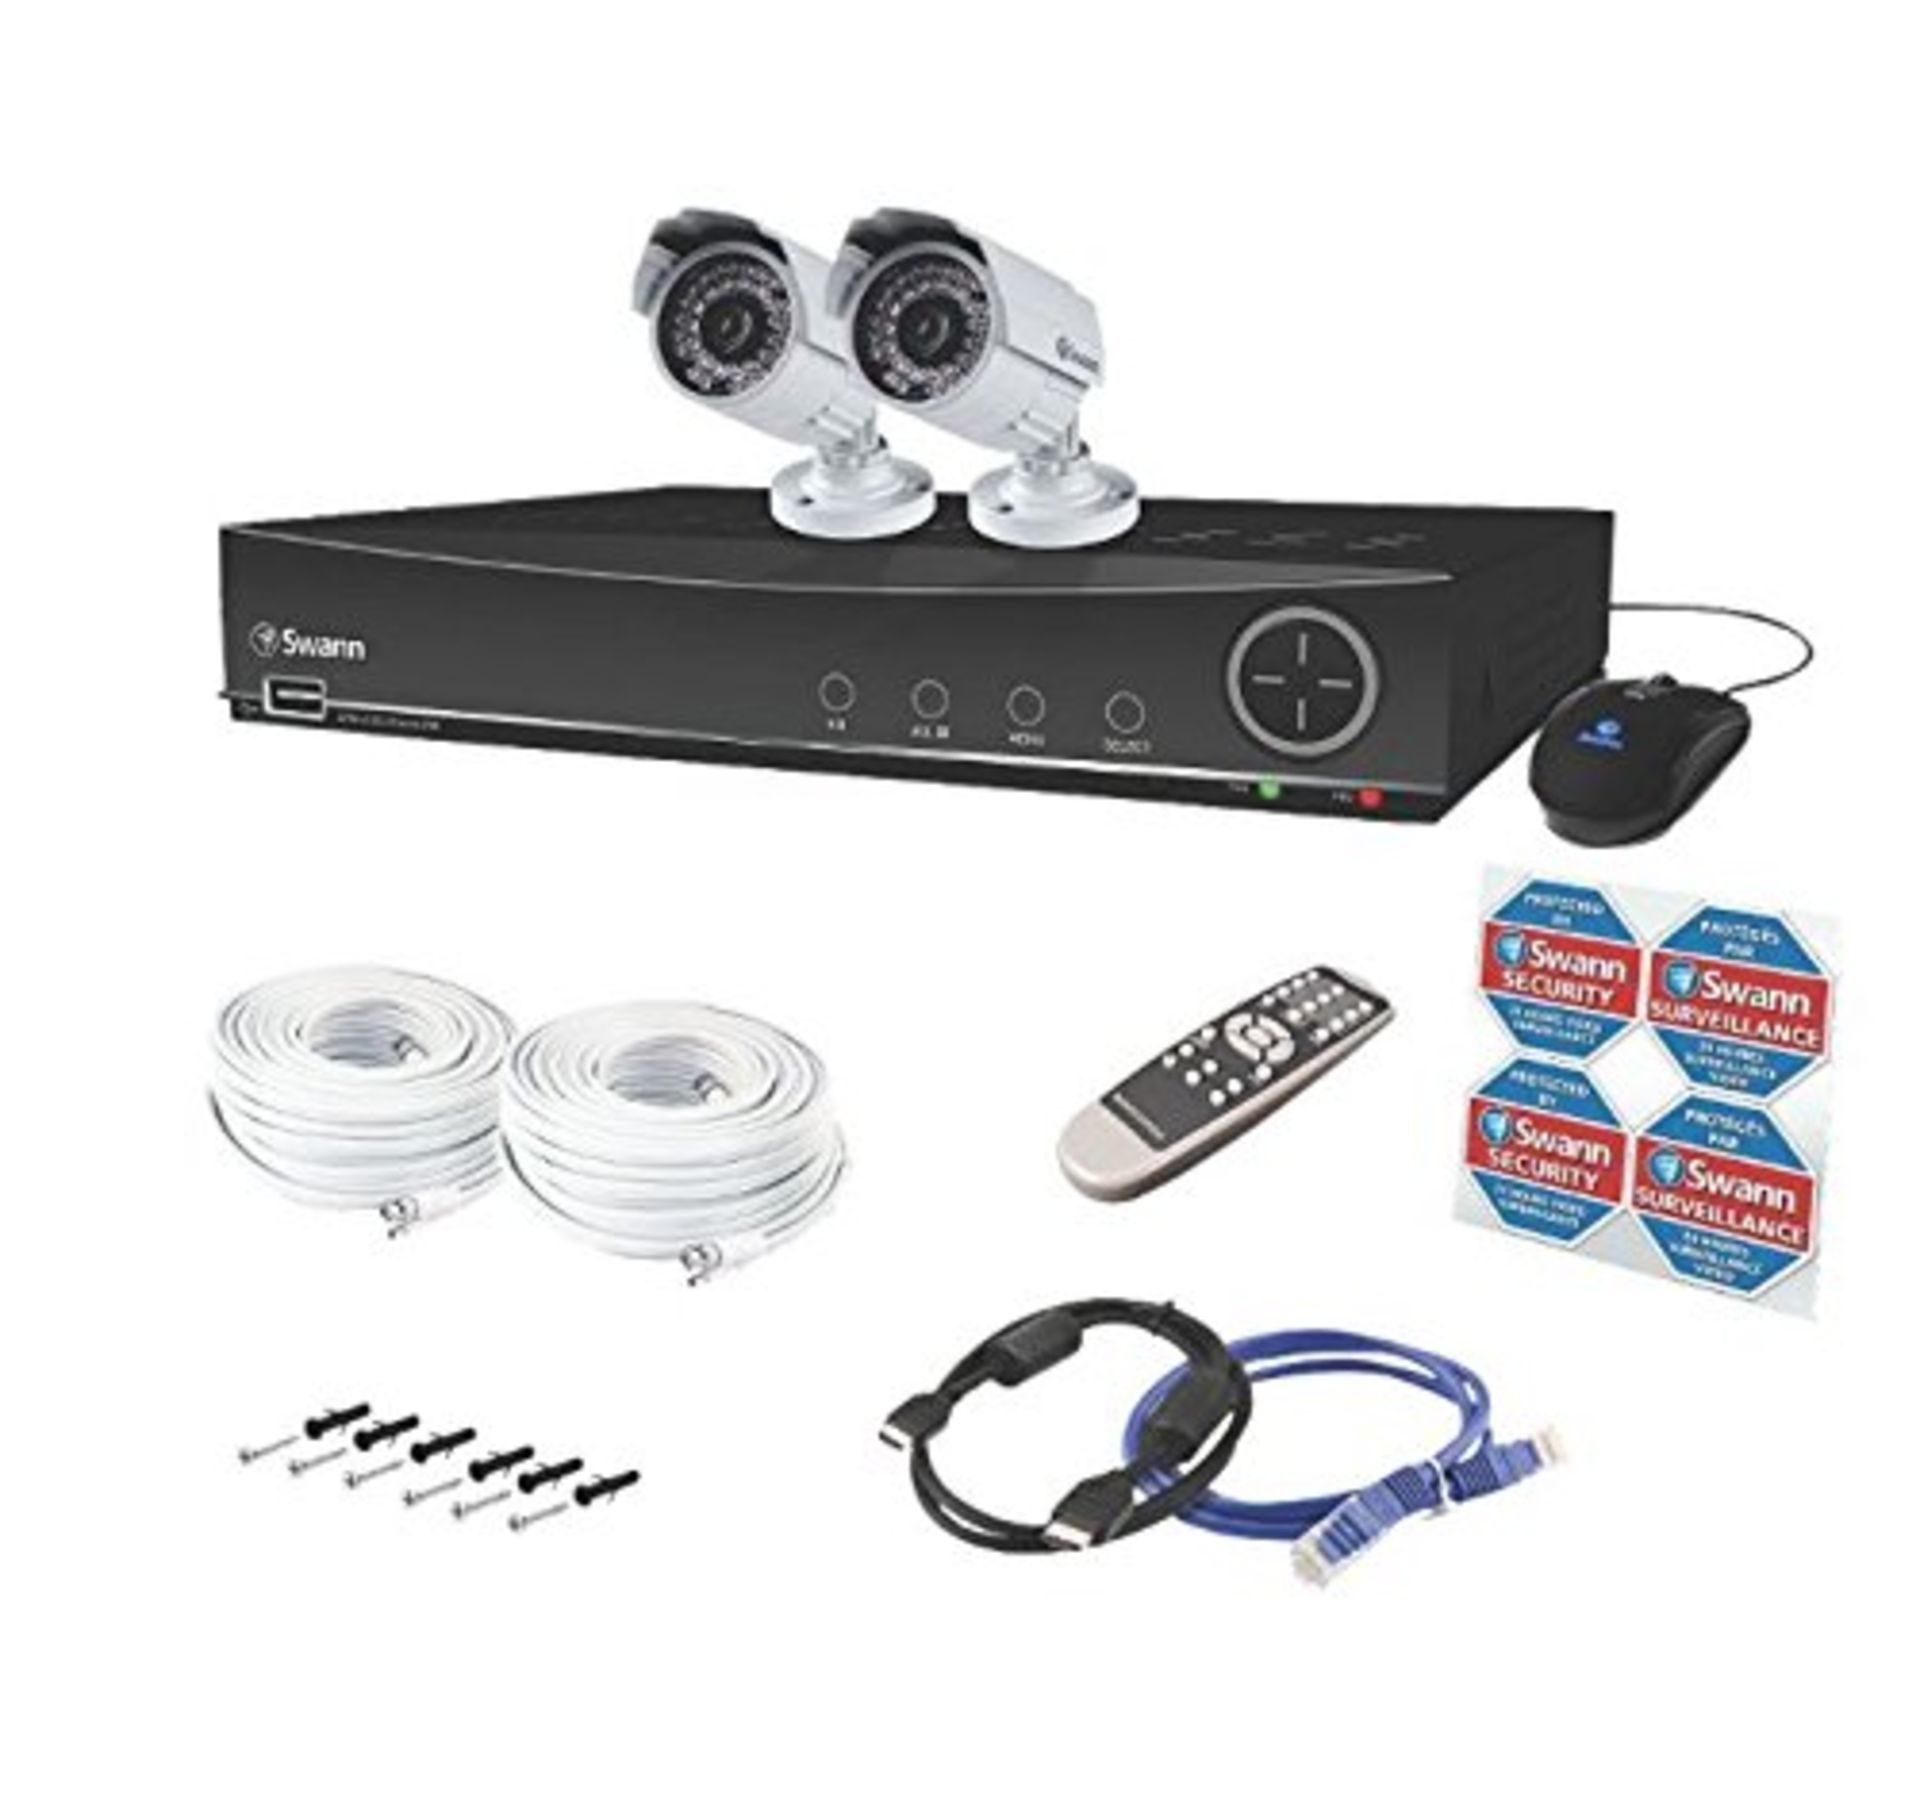 V Grade A Swann Model 441002A 4 Channel Digital Video Security System With Recorder And 2 Pro